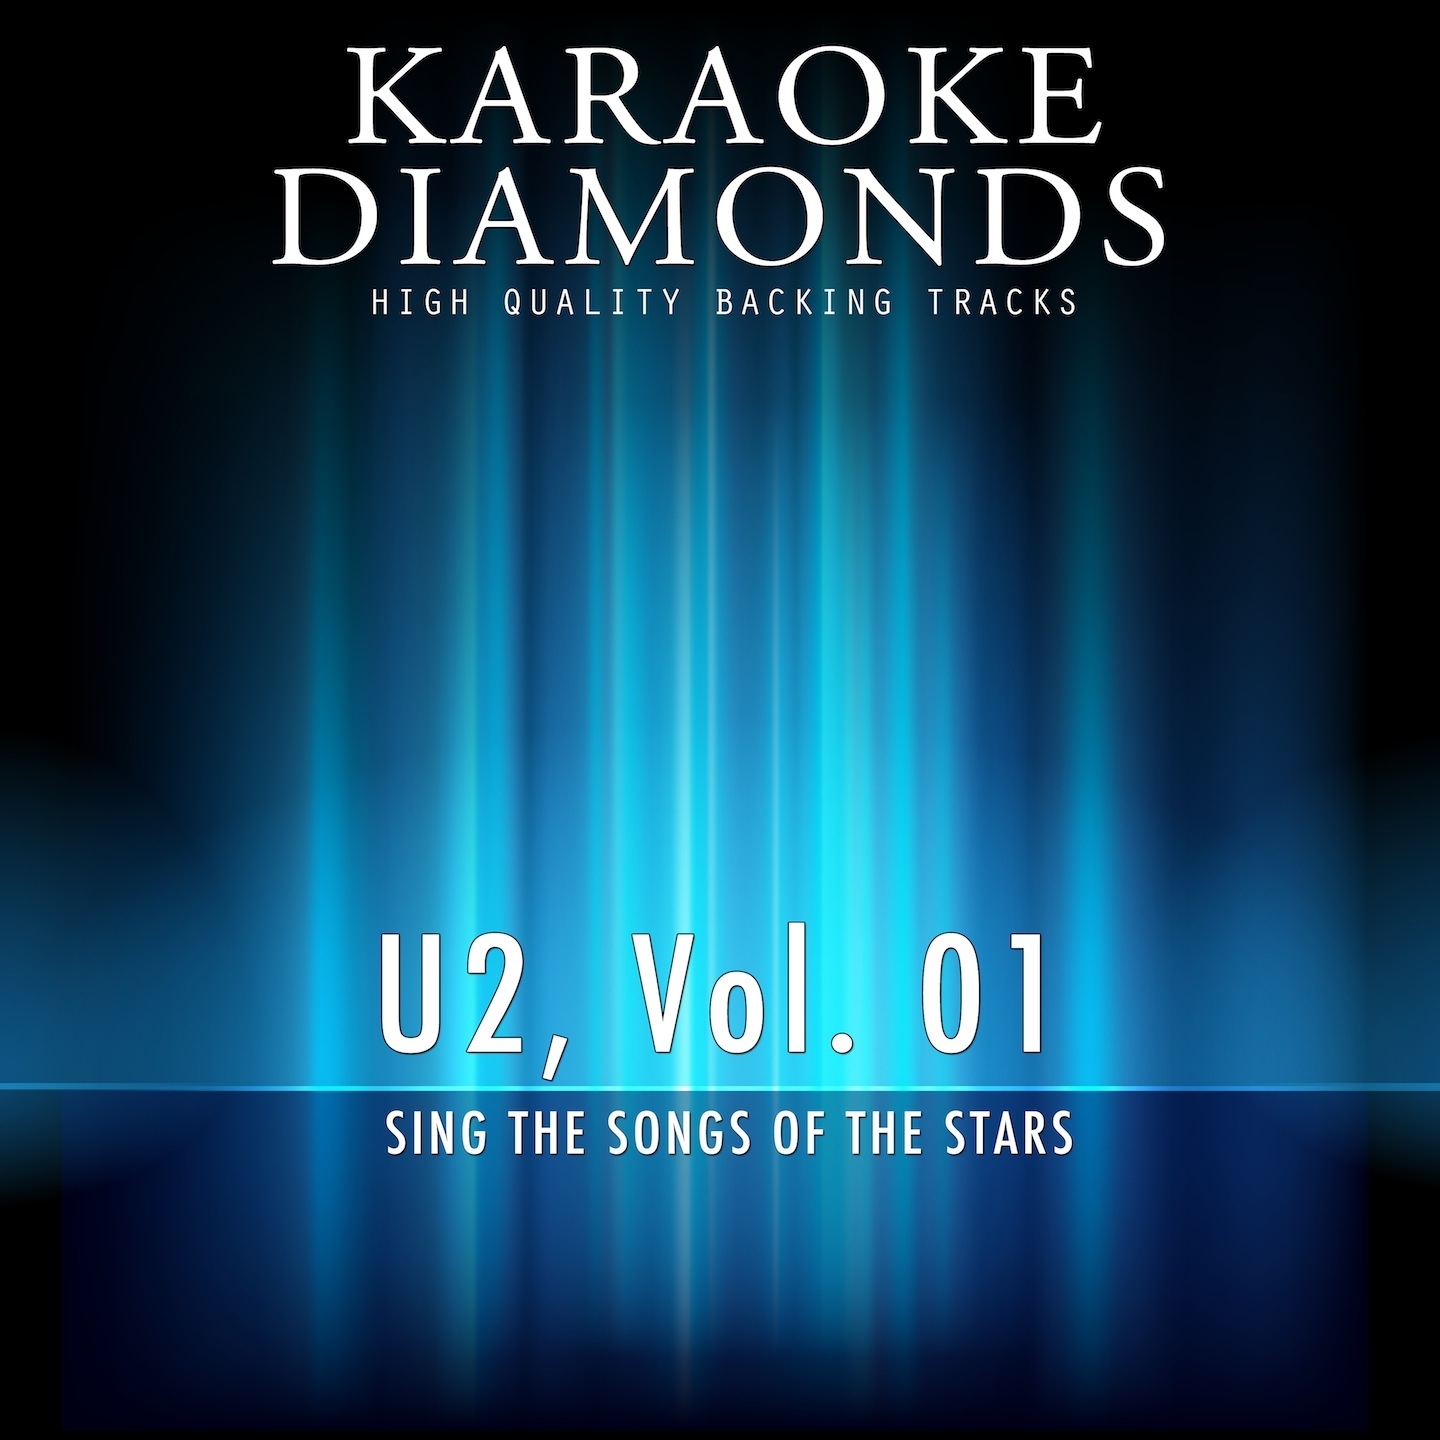 When Love Came to Town (Karaoke Version In the Style of U2)